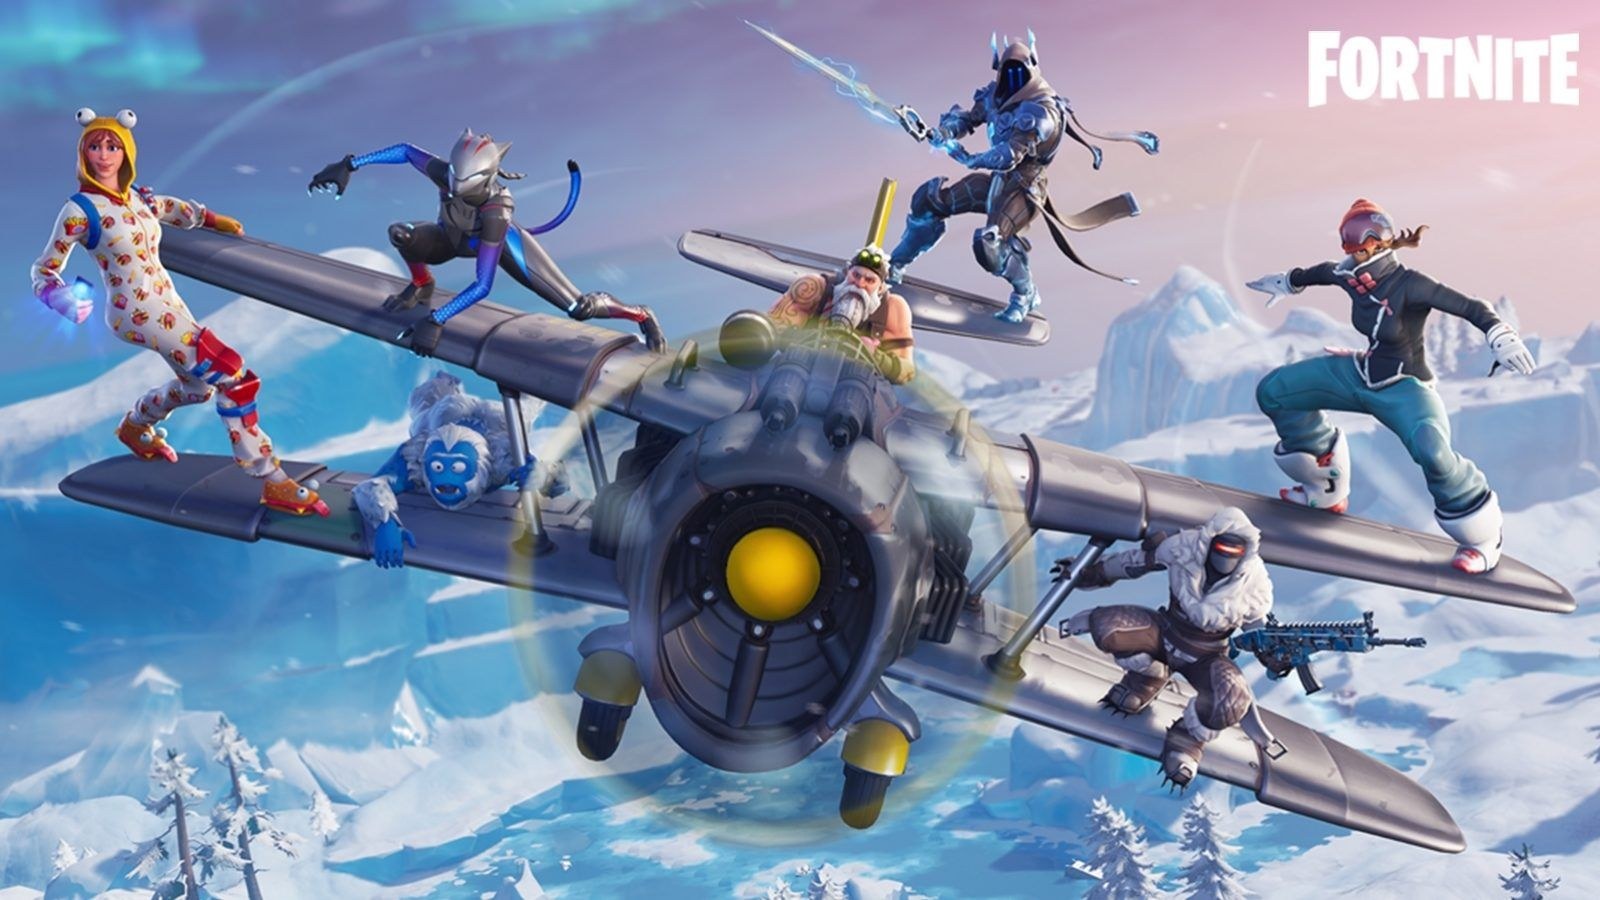 Fortnite Season 7 Battle Pass Skins Show Your Festive Cheer With Ice King